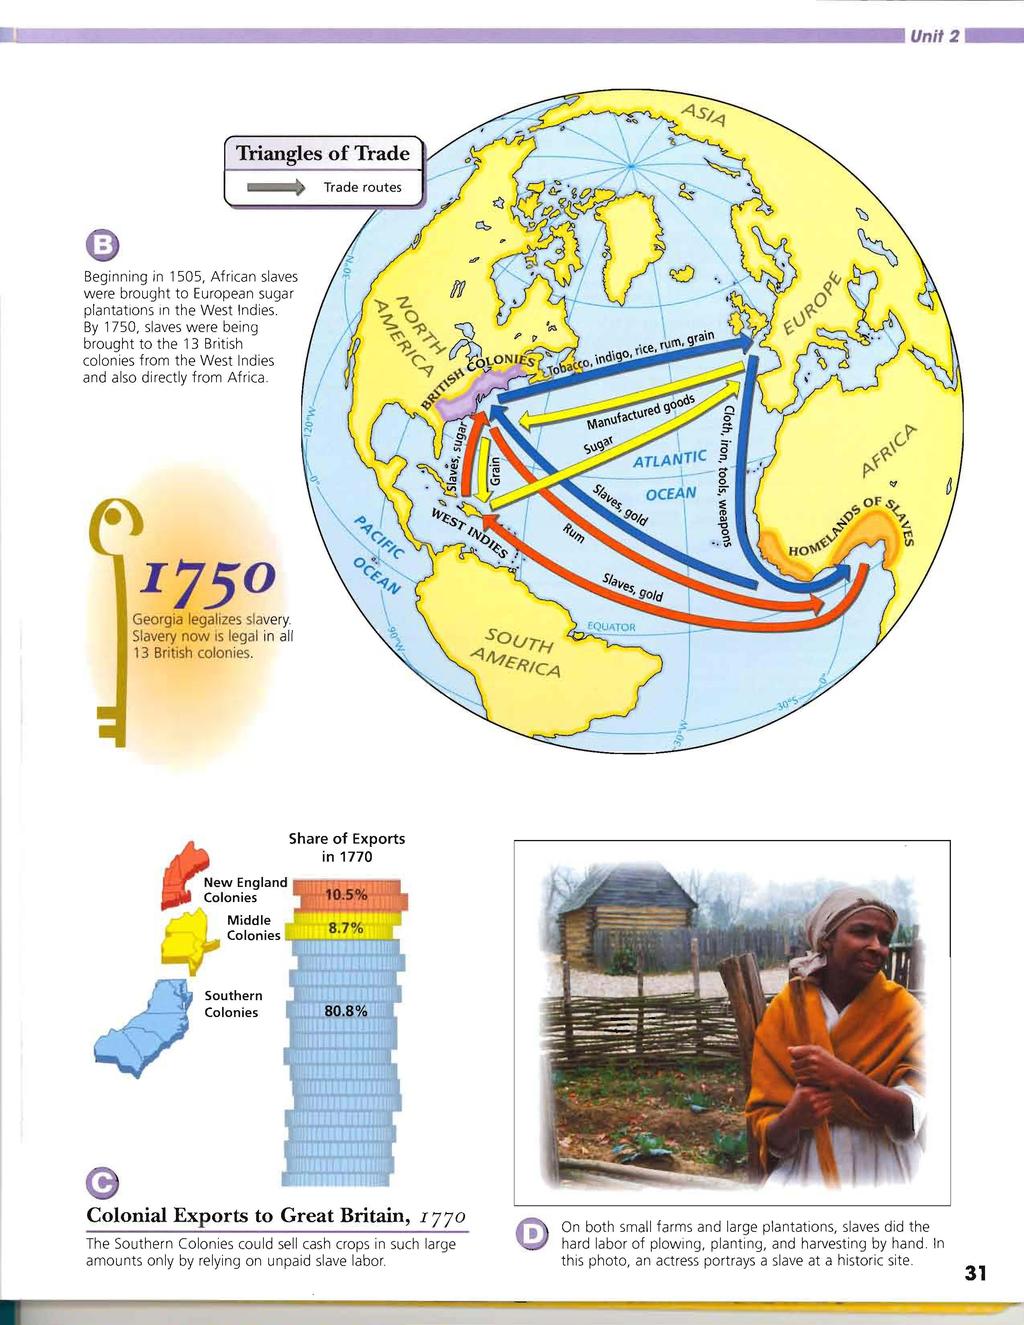 Unit 2 J.- Triangles of Trade Trade routes - Beginning in 1505, African slaves were brought to European sugar plantations In the West Indies.